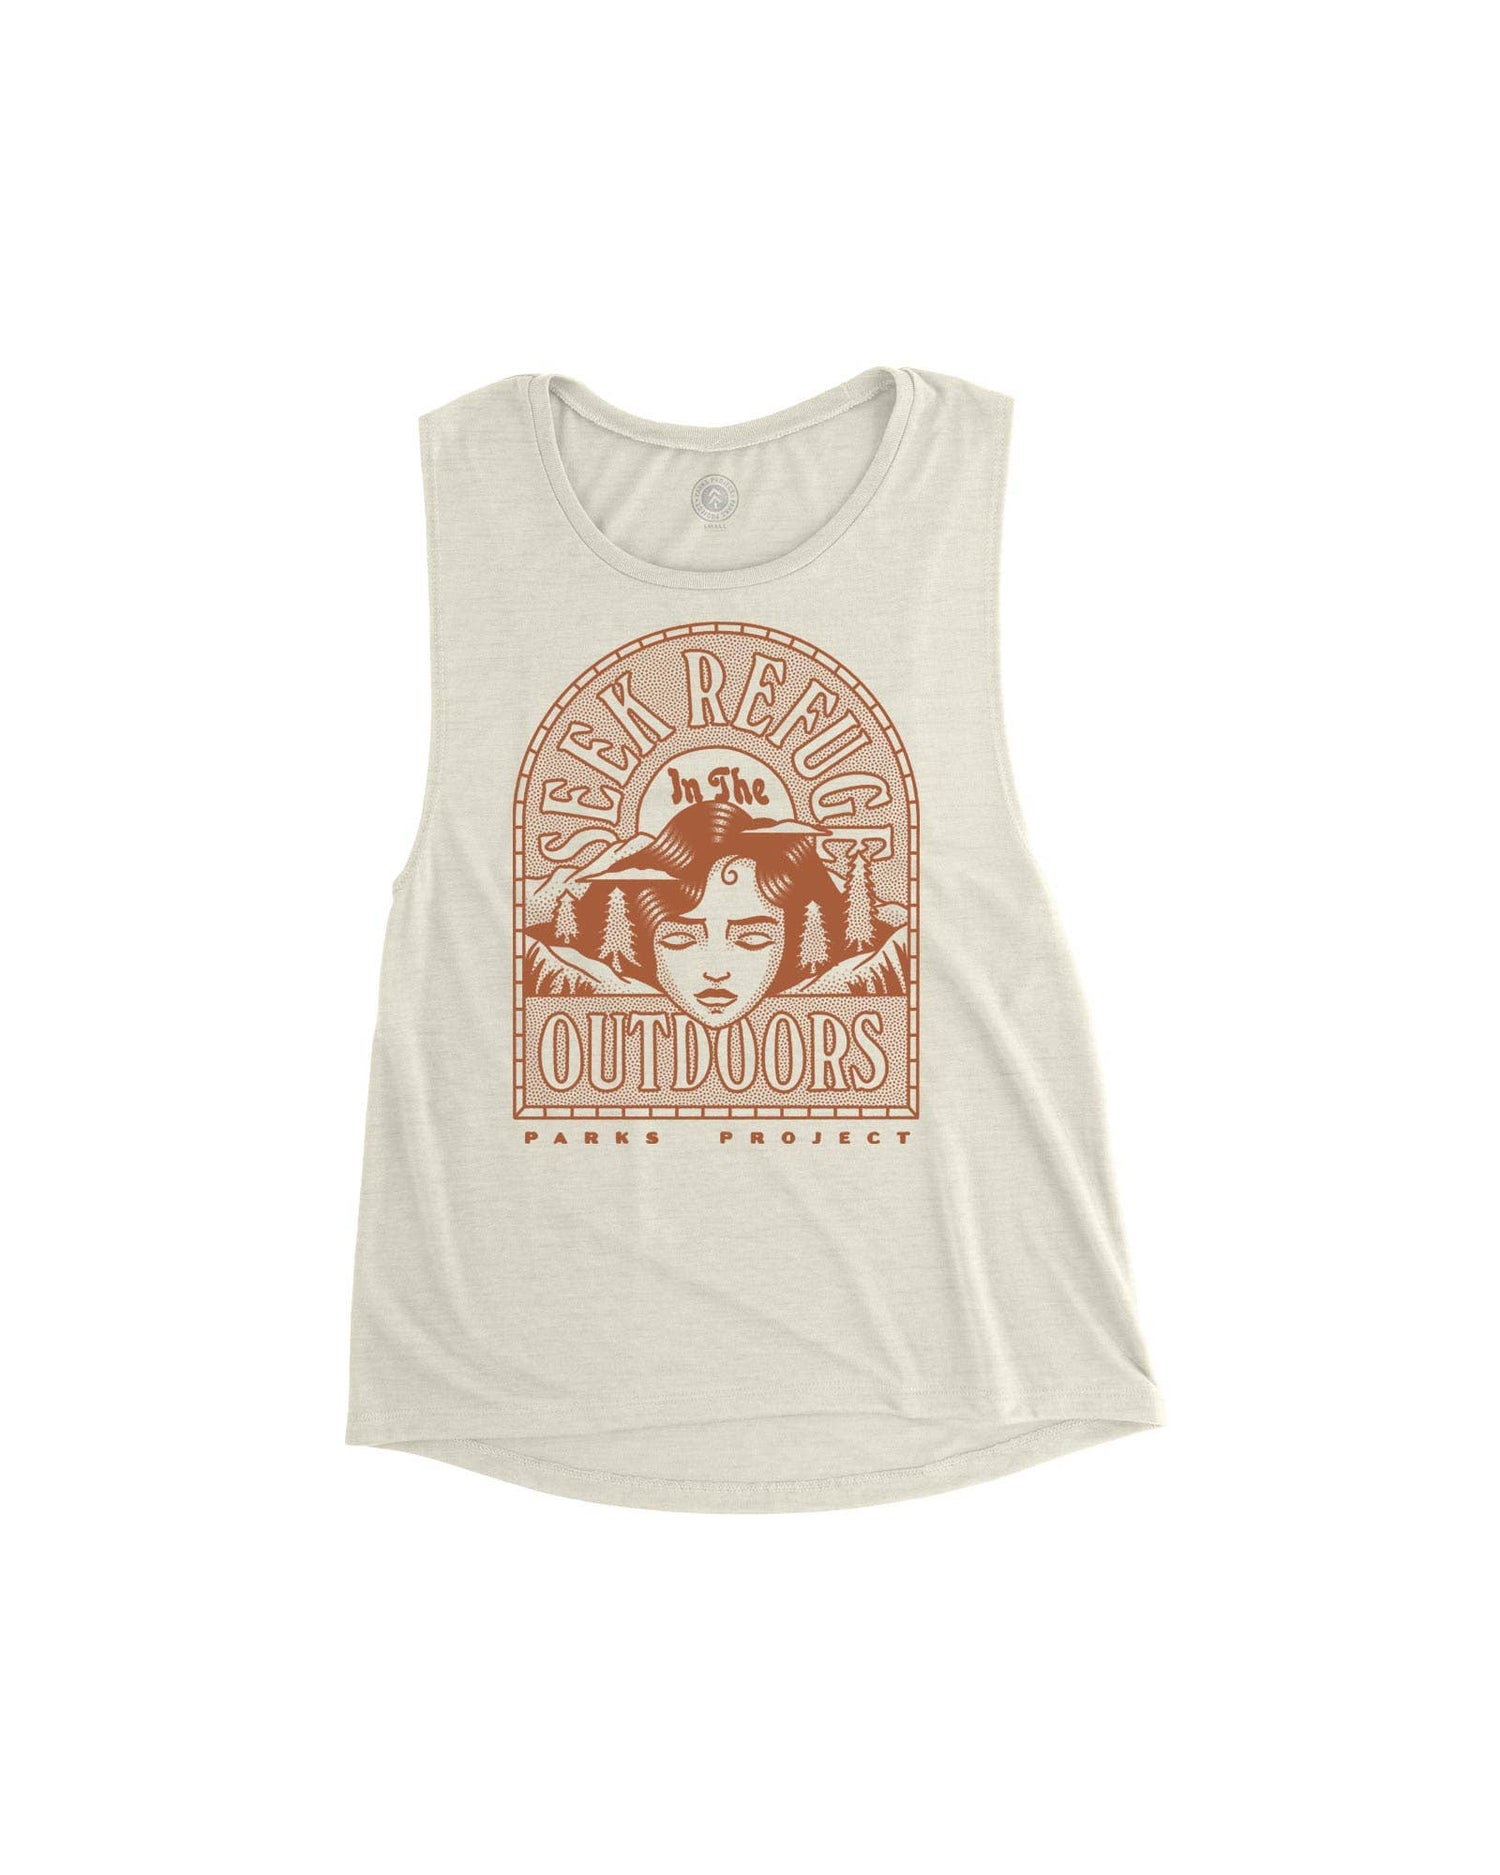 White tank top with Seek Refuge in the Outdoors design by Parks Project